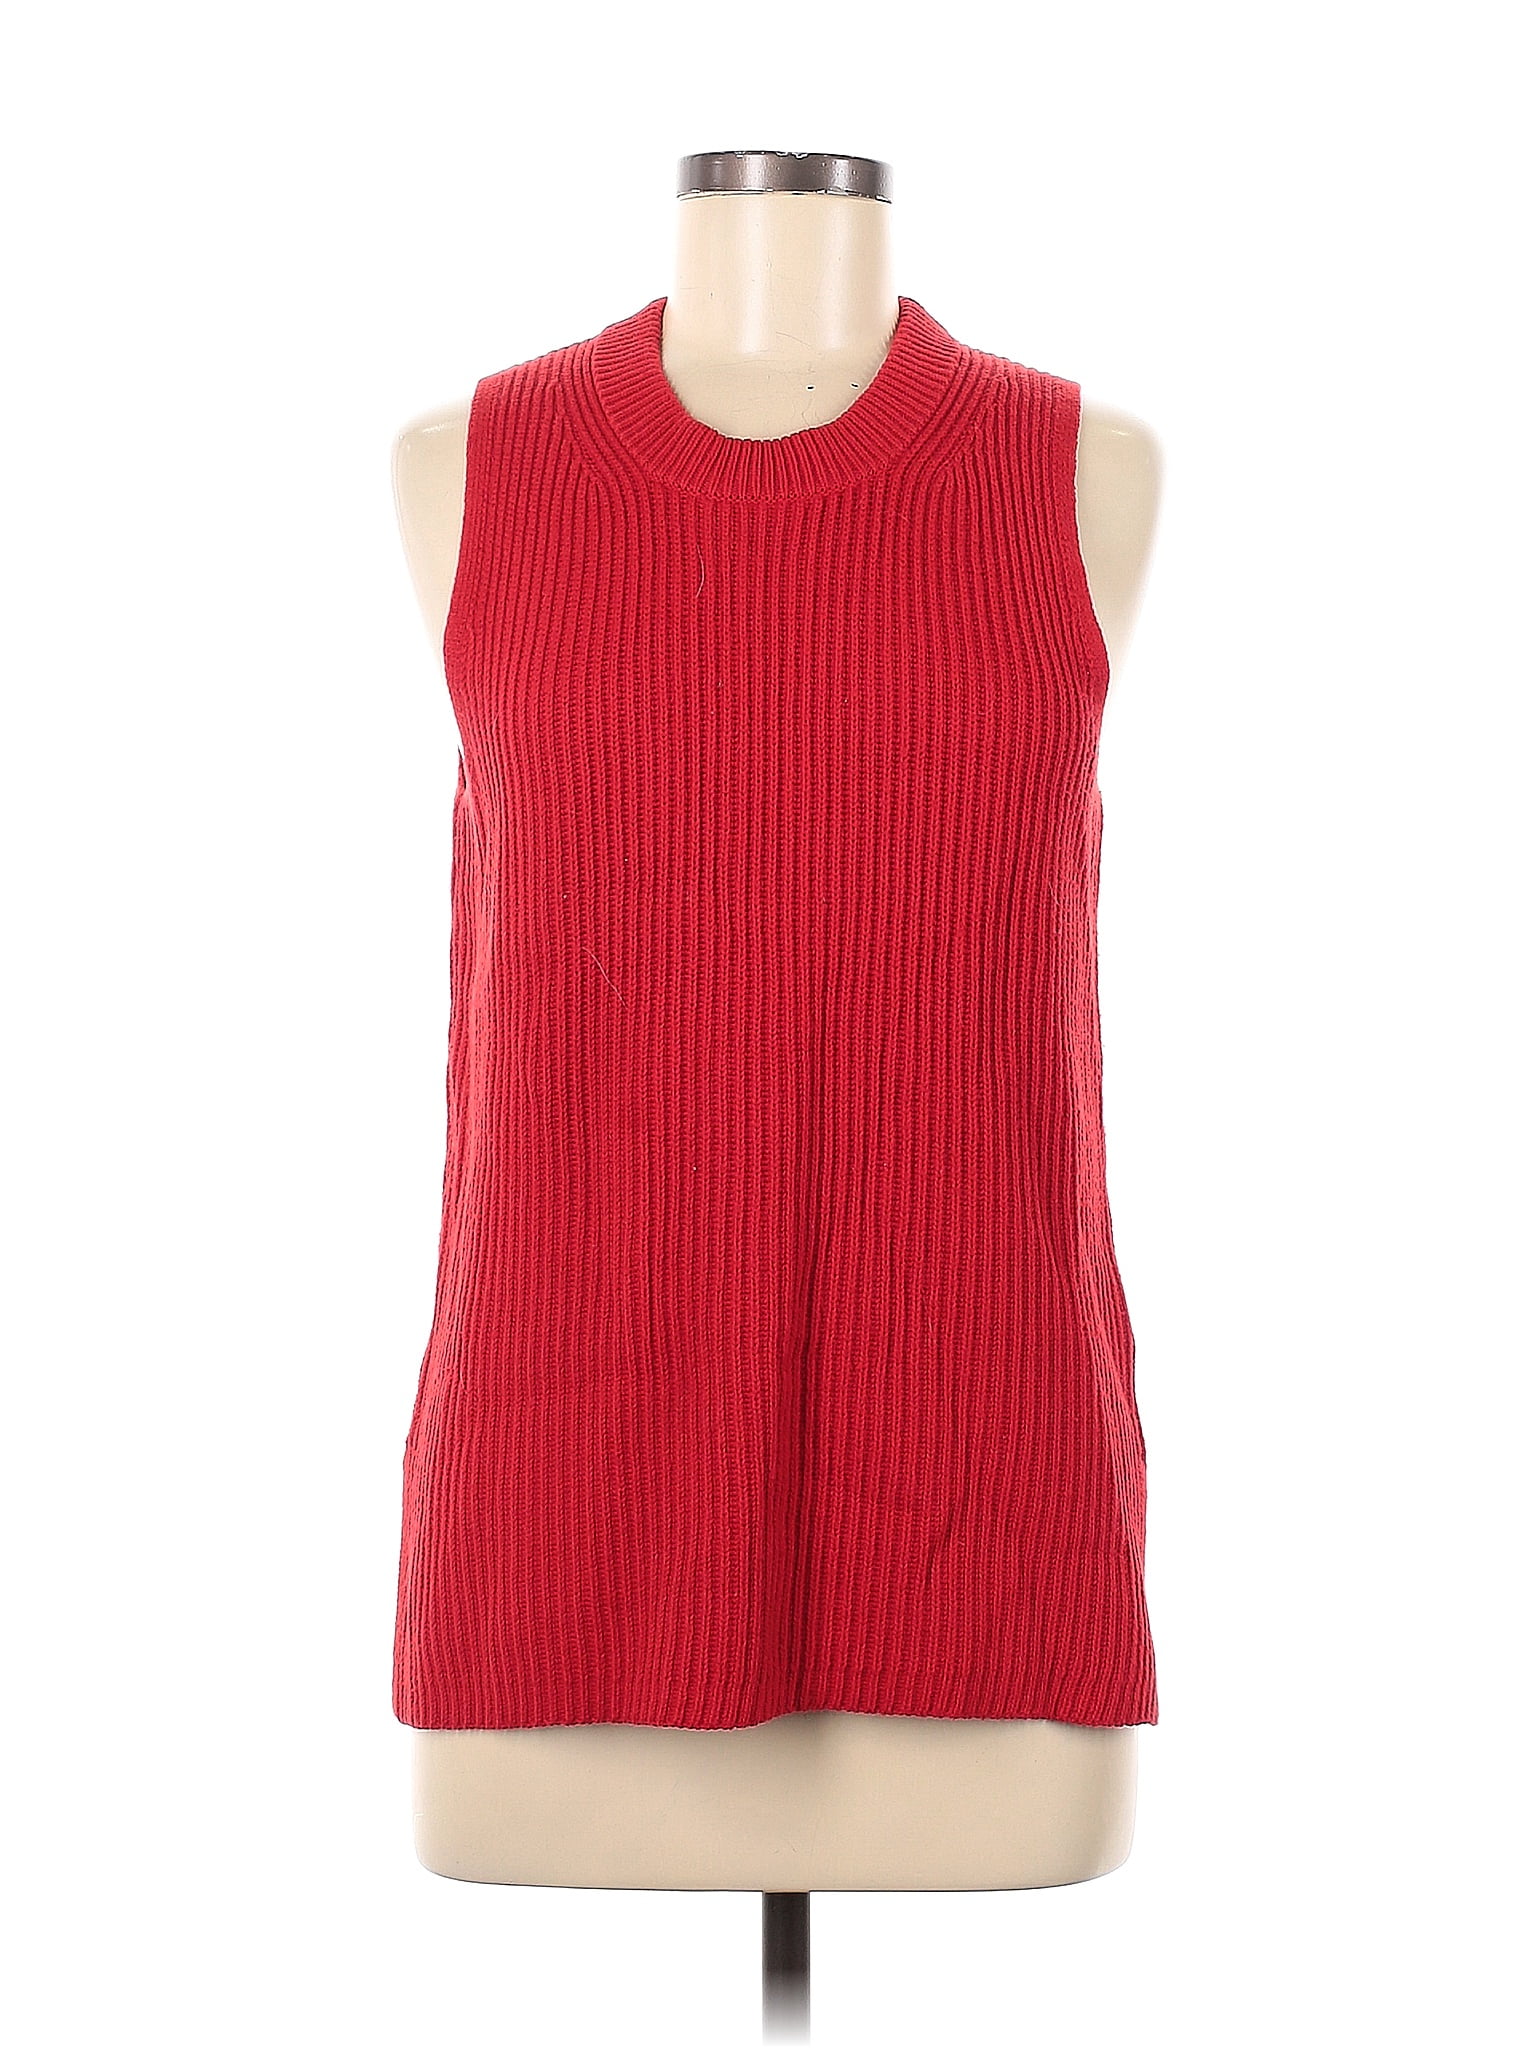 J.Crew Color Block Solid Red Pullover Sweater Size S - 78% off | thredUP